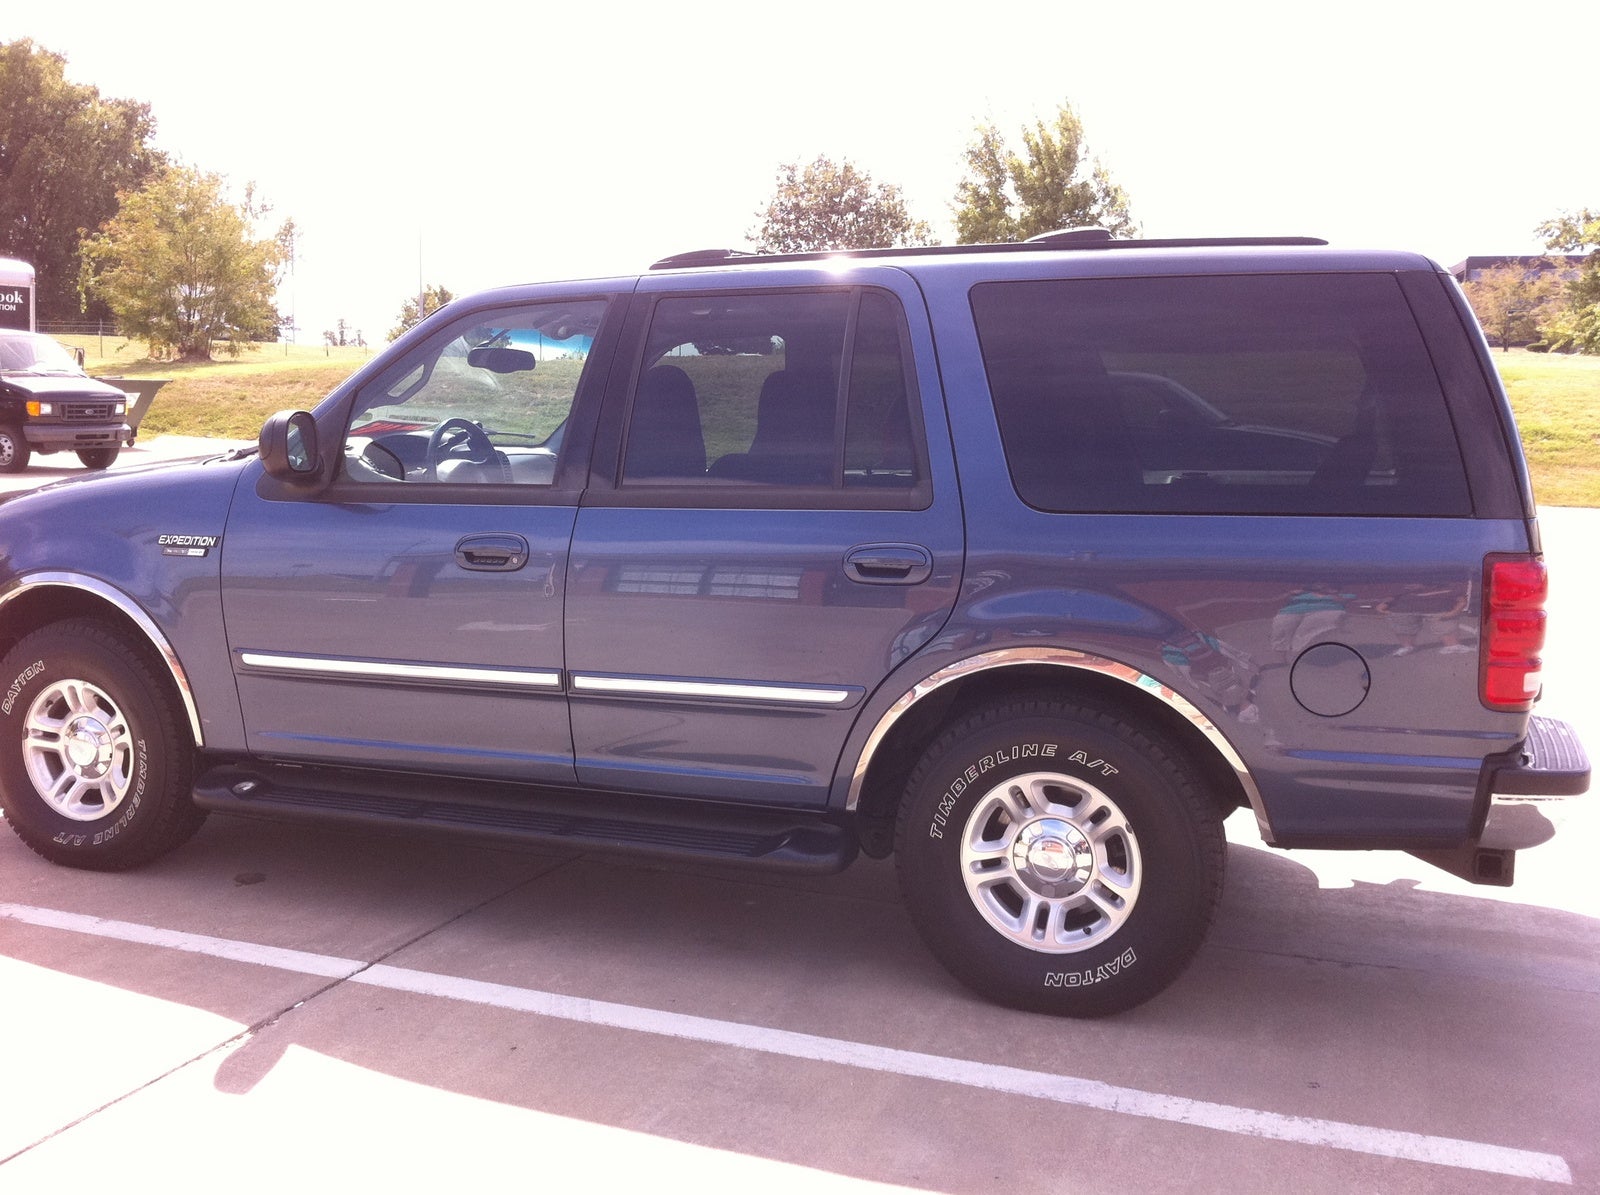 2000 Ford expedition online manual #7